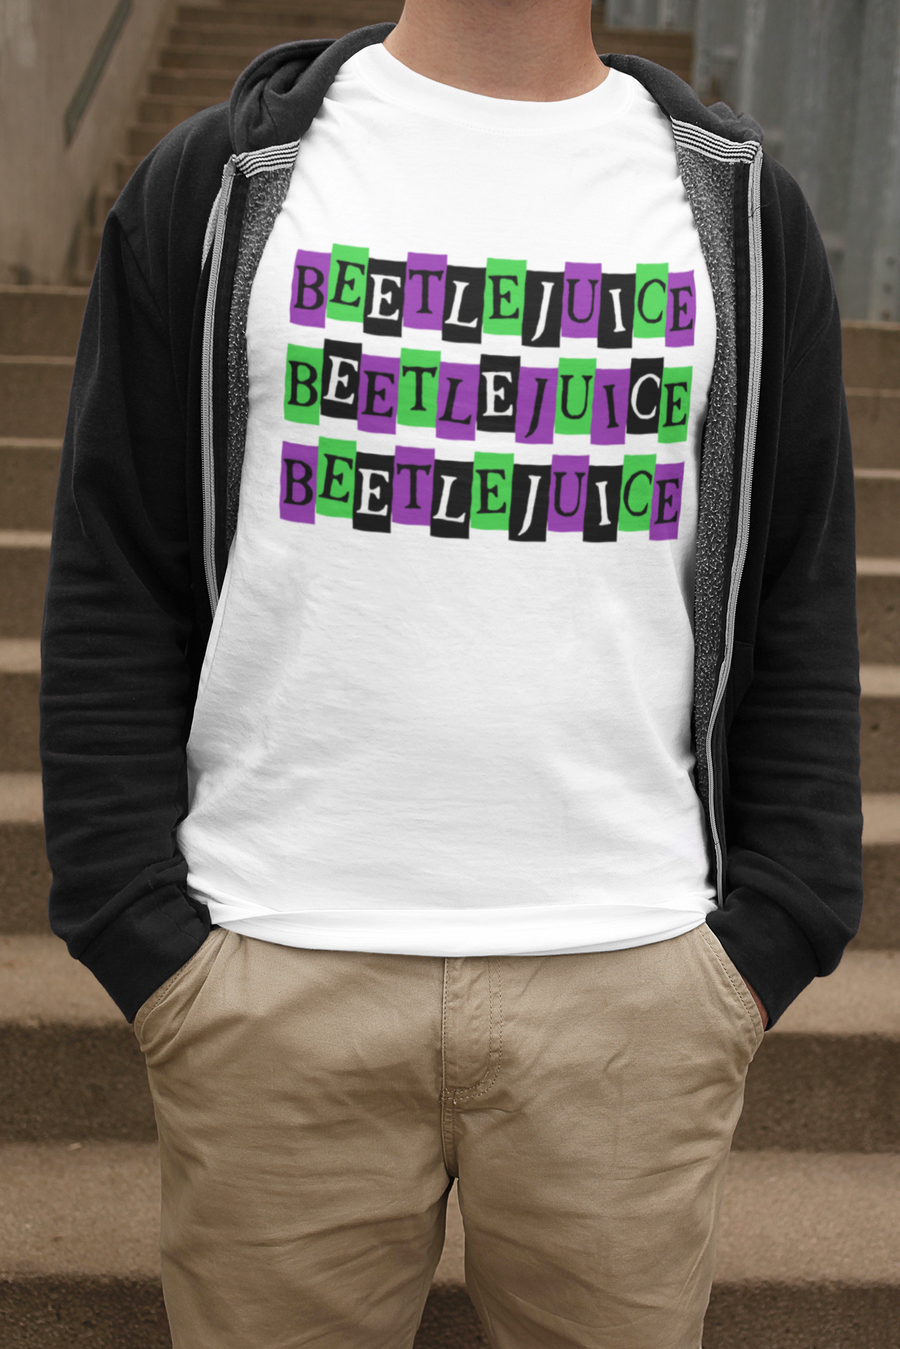 Beetlejuice Beetlejuice Beetlejuice | Tee (Infant Sizes up to Adult 5X)